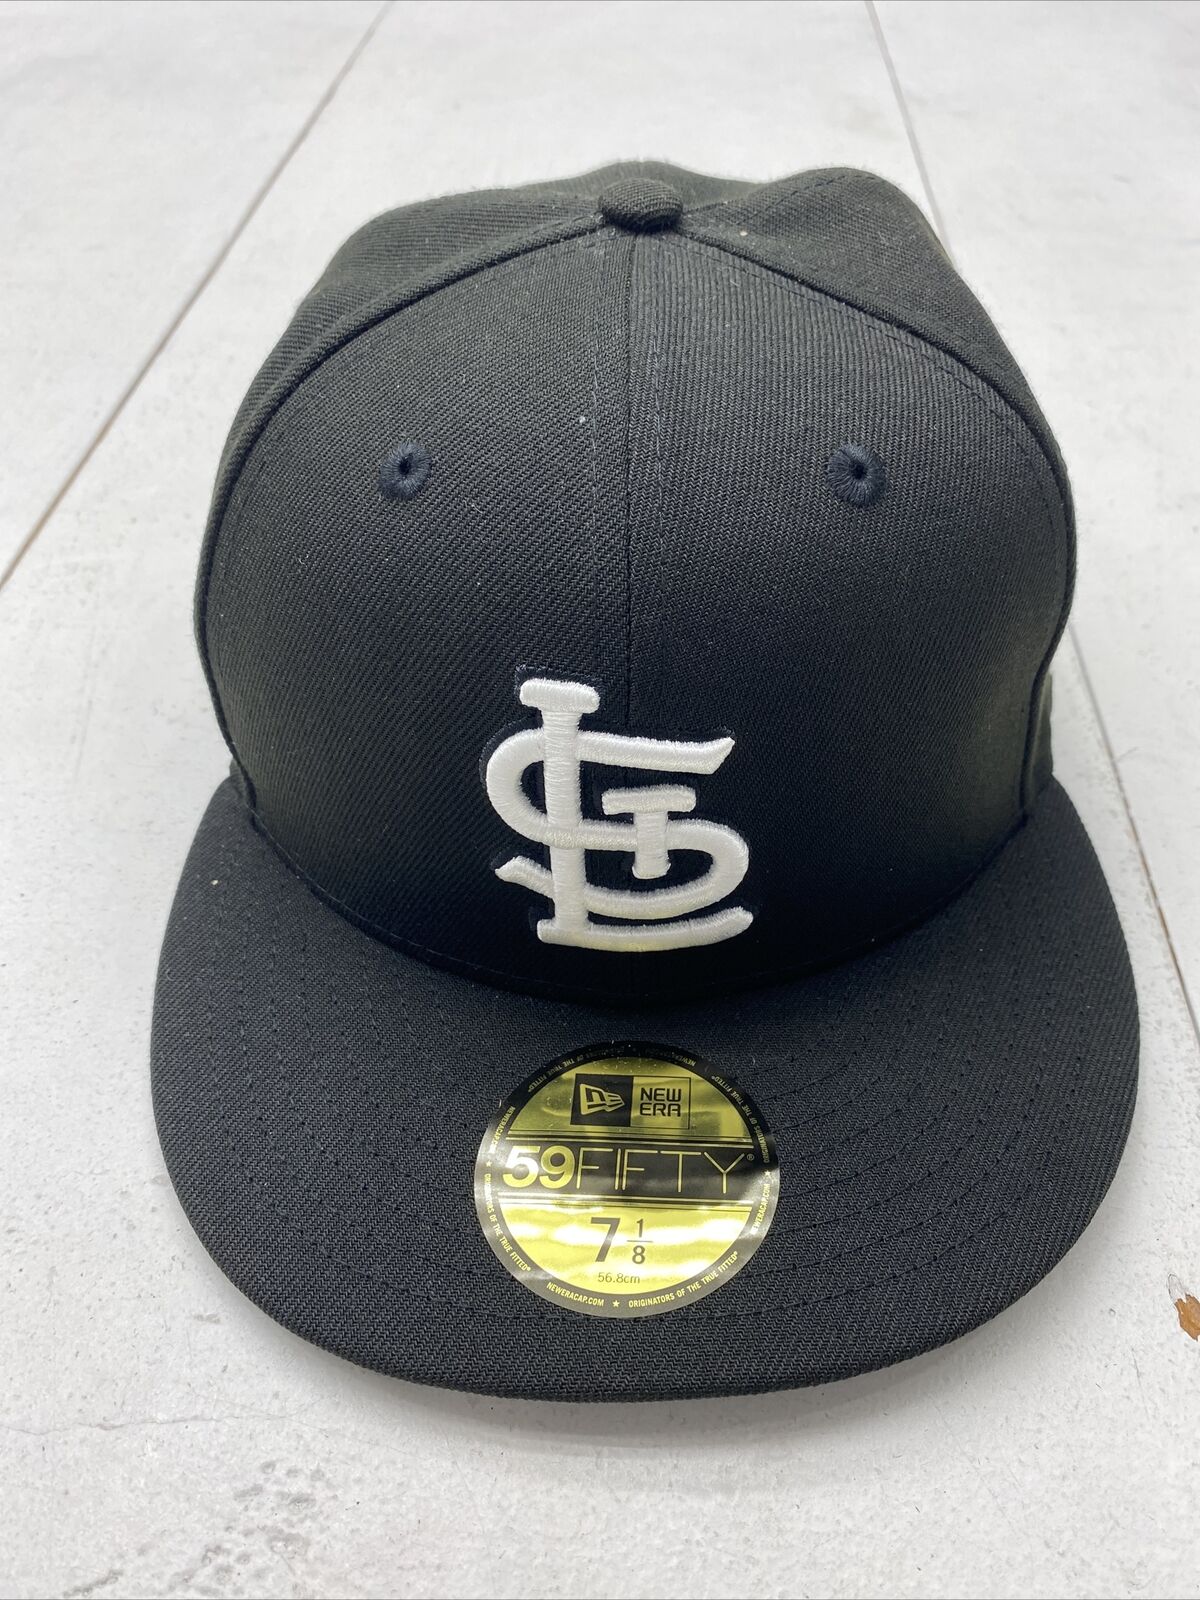 St. Louis Cardinals New Era Black White 59Fifty MLB Fitted Hat Size 7 -  beyond exchange